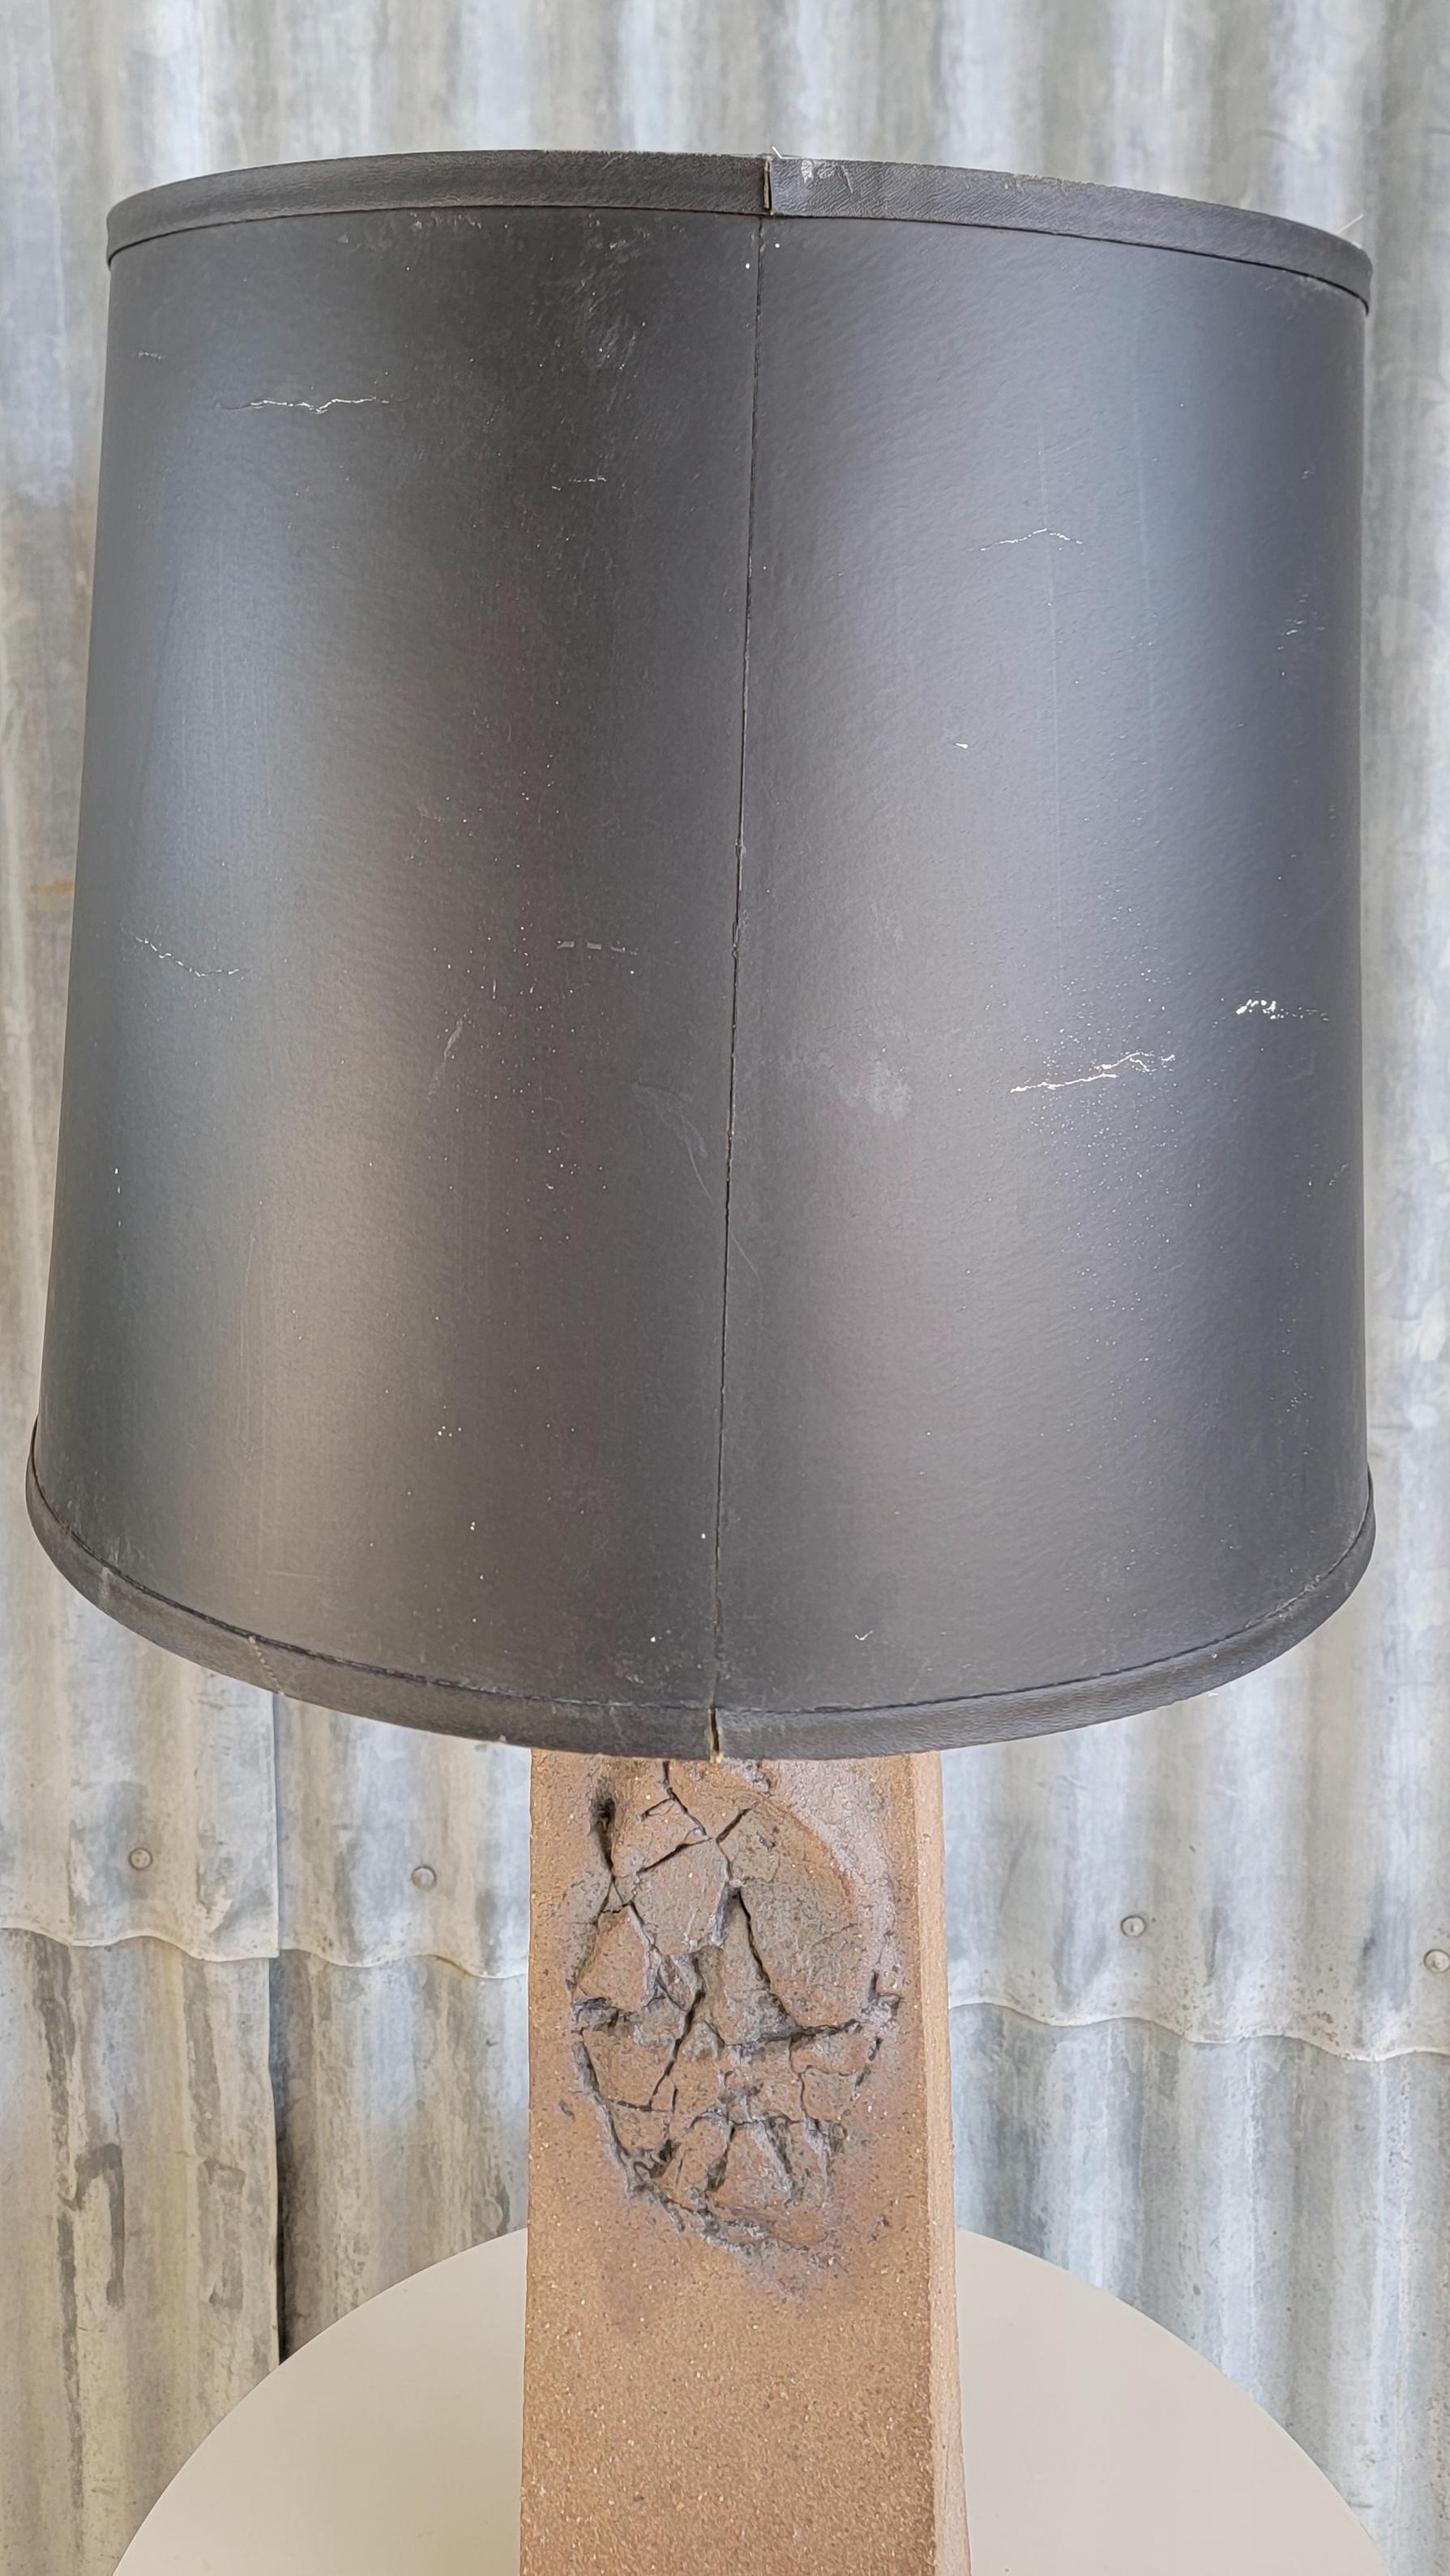 Brutalist table lamp with 3 incised symbols. Original Foss lamp shade. Shade only measures 15.5 inch diameter, 16.75 inch high earthenware base only measures 16.75 inches high, 5.38 inch square. 